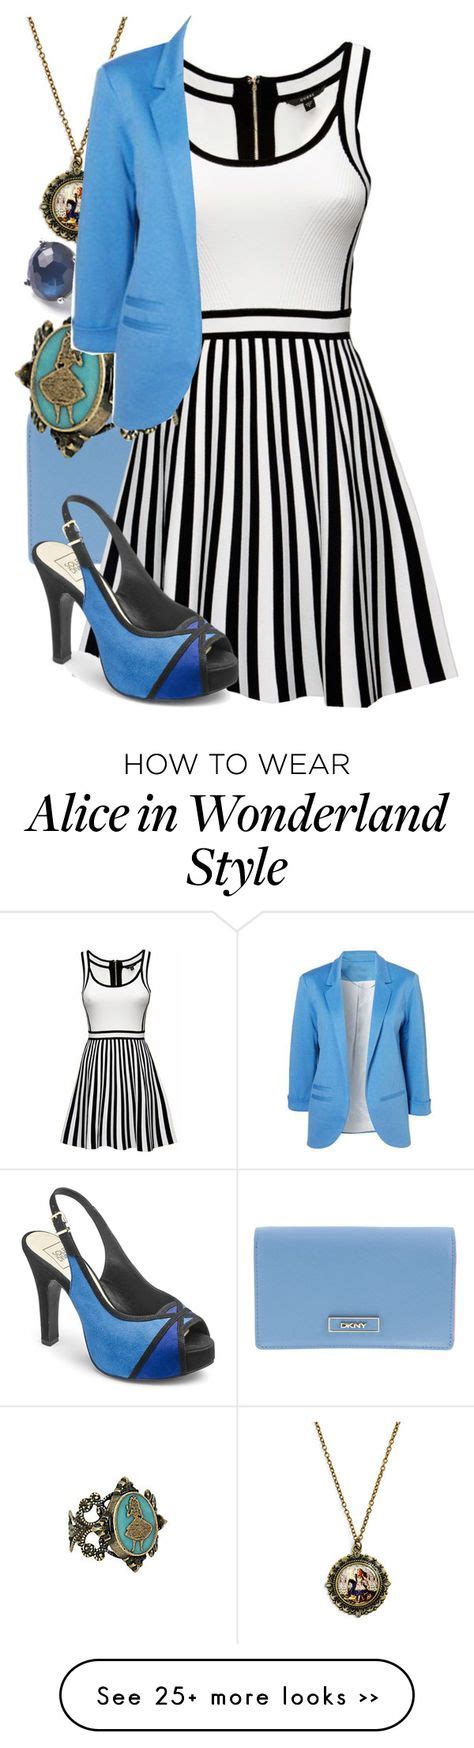 Modern Alice By Girlonfire1 On Polyvore Featuring Dkny Ippolita